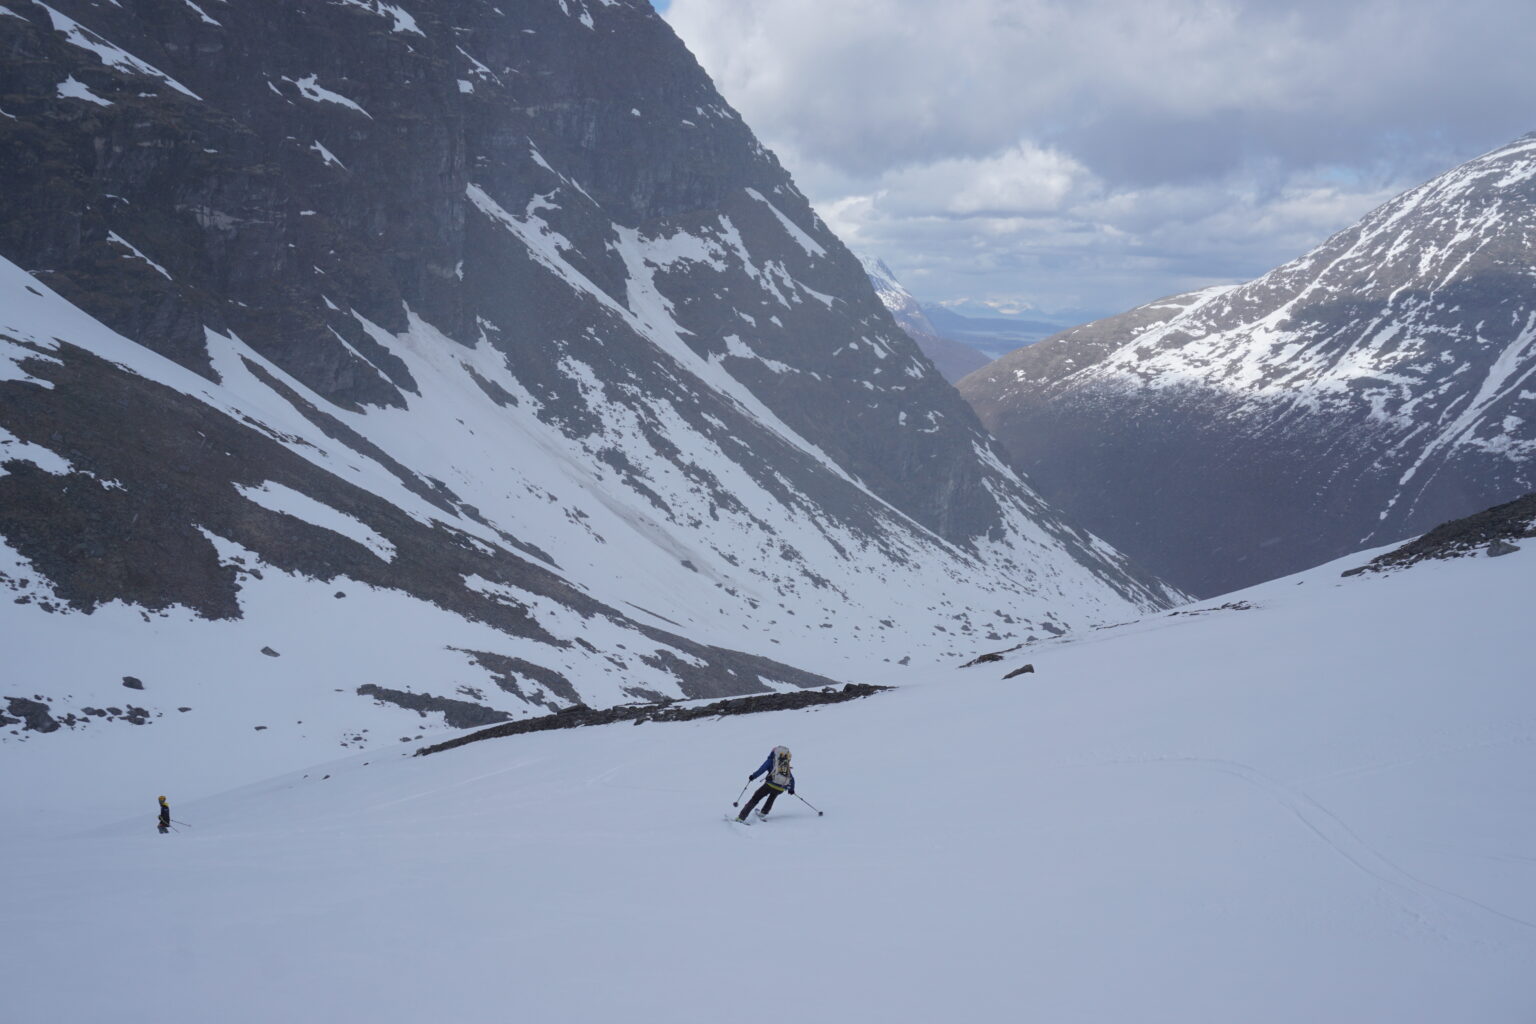 Skiing back down to camp